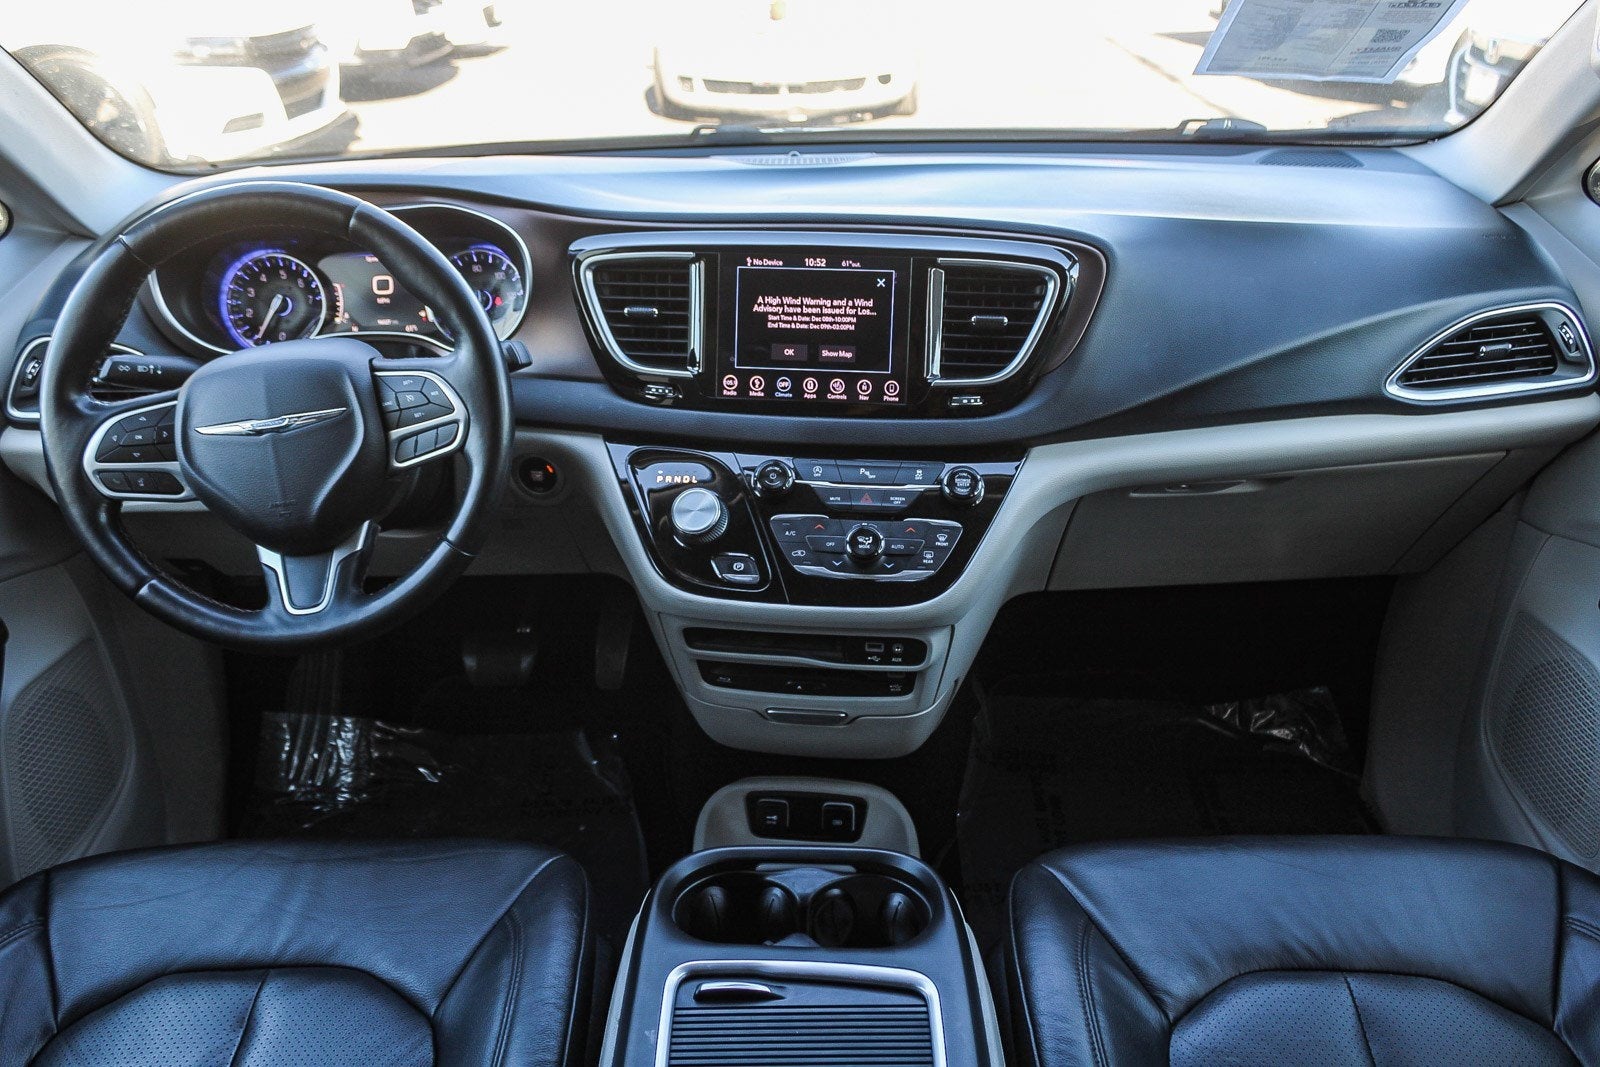 2018 Chrysler Pacifica Touring L Plus